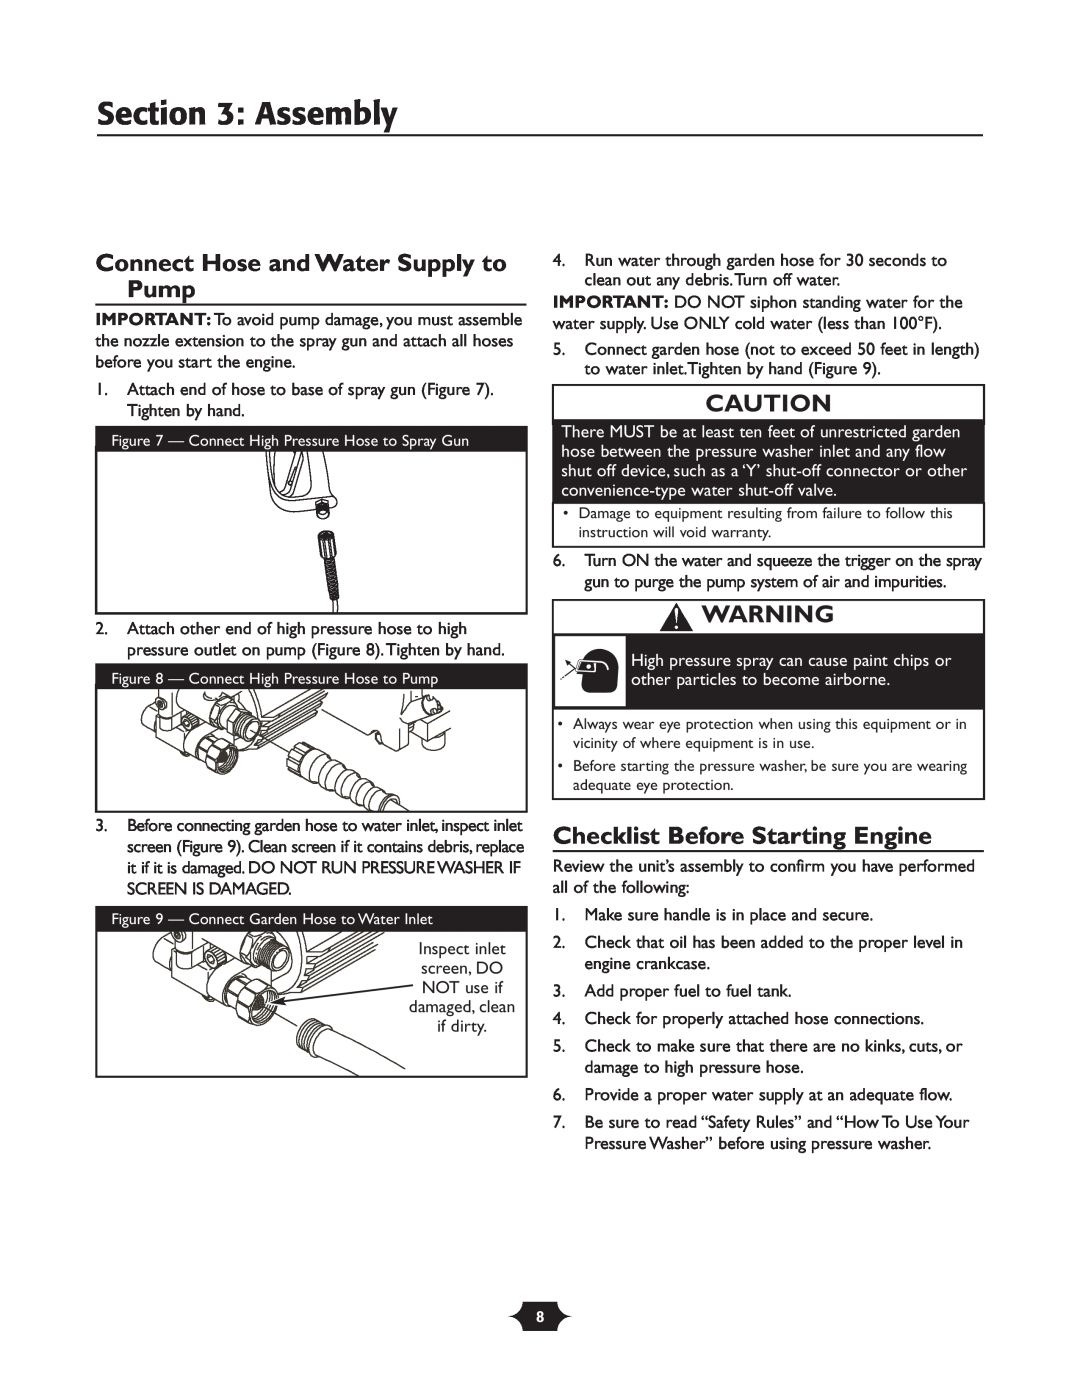 Briggs & Stratton 20209 owner manual Connect Hose and Water Supply to Pump, Checklist Before Starting Engine, Assembly 